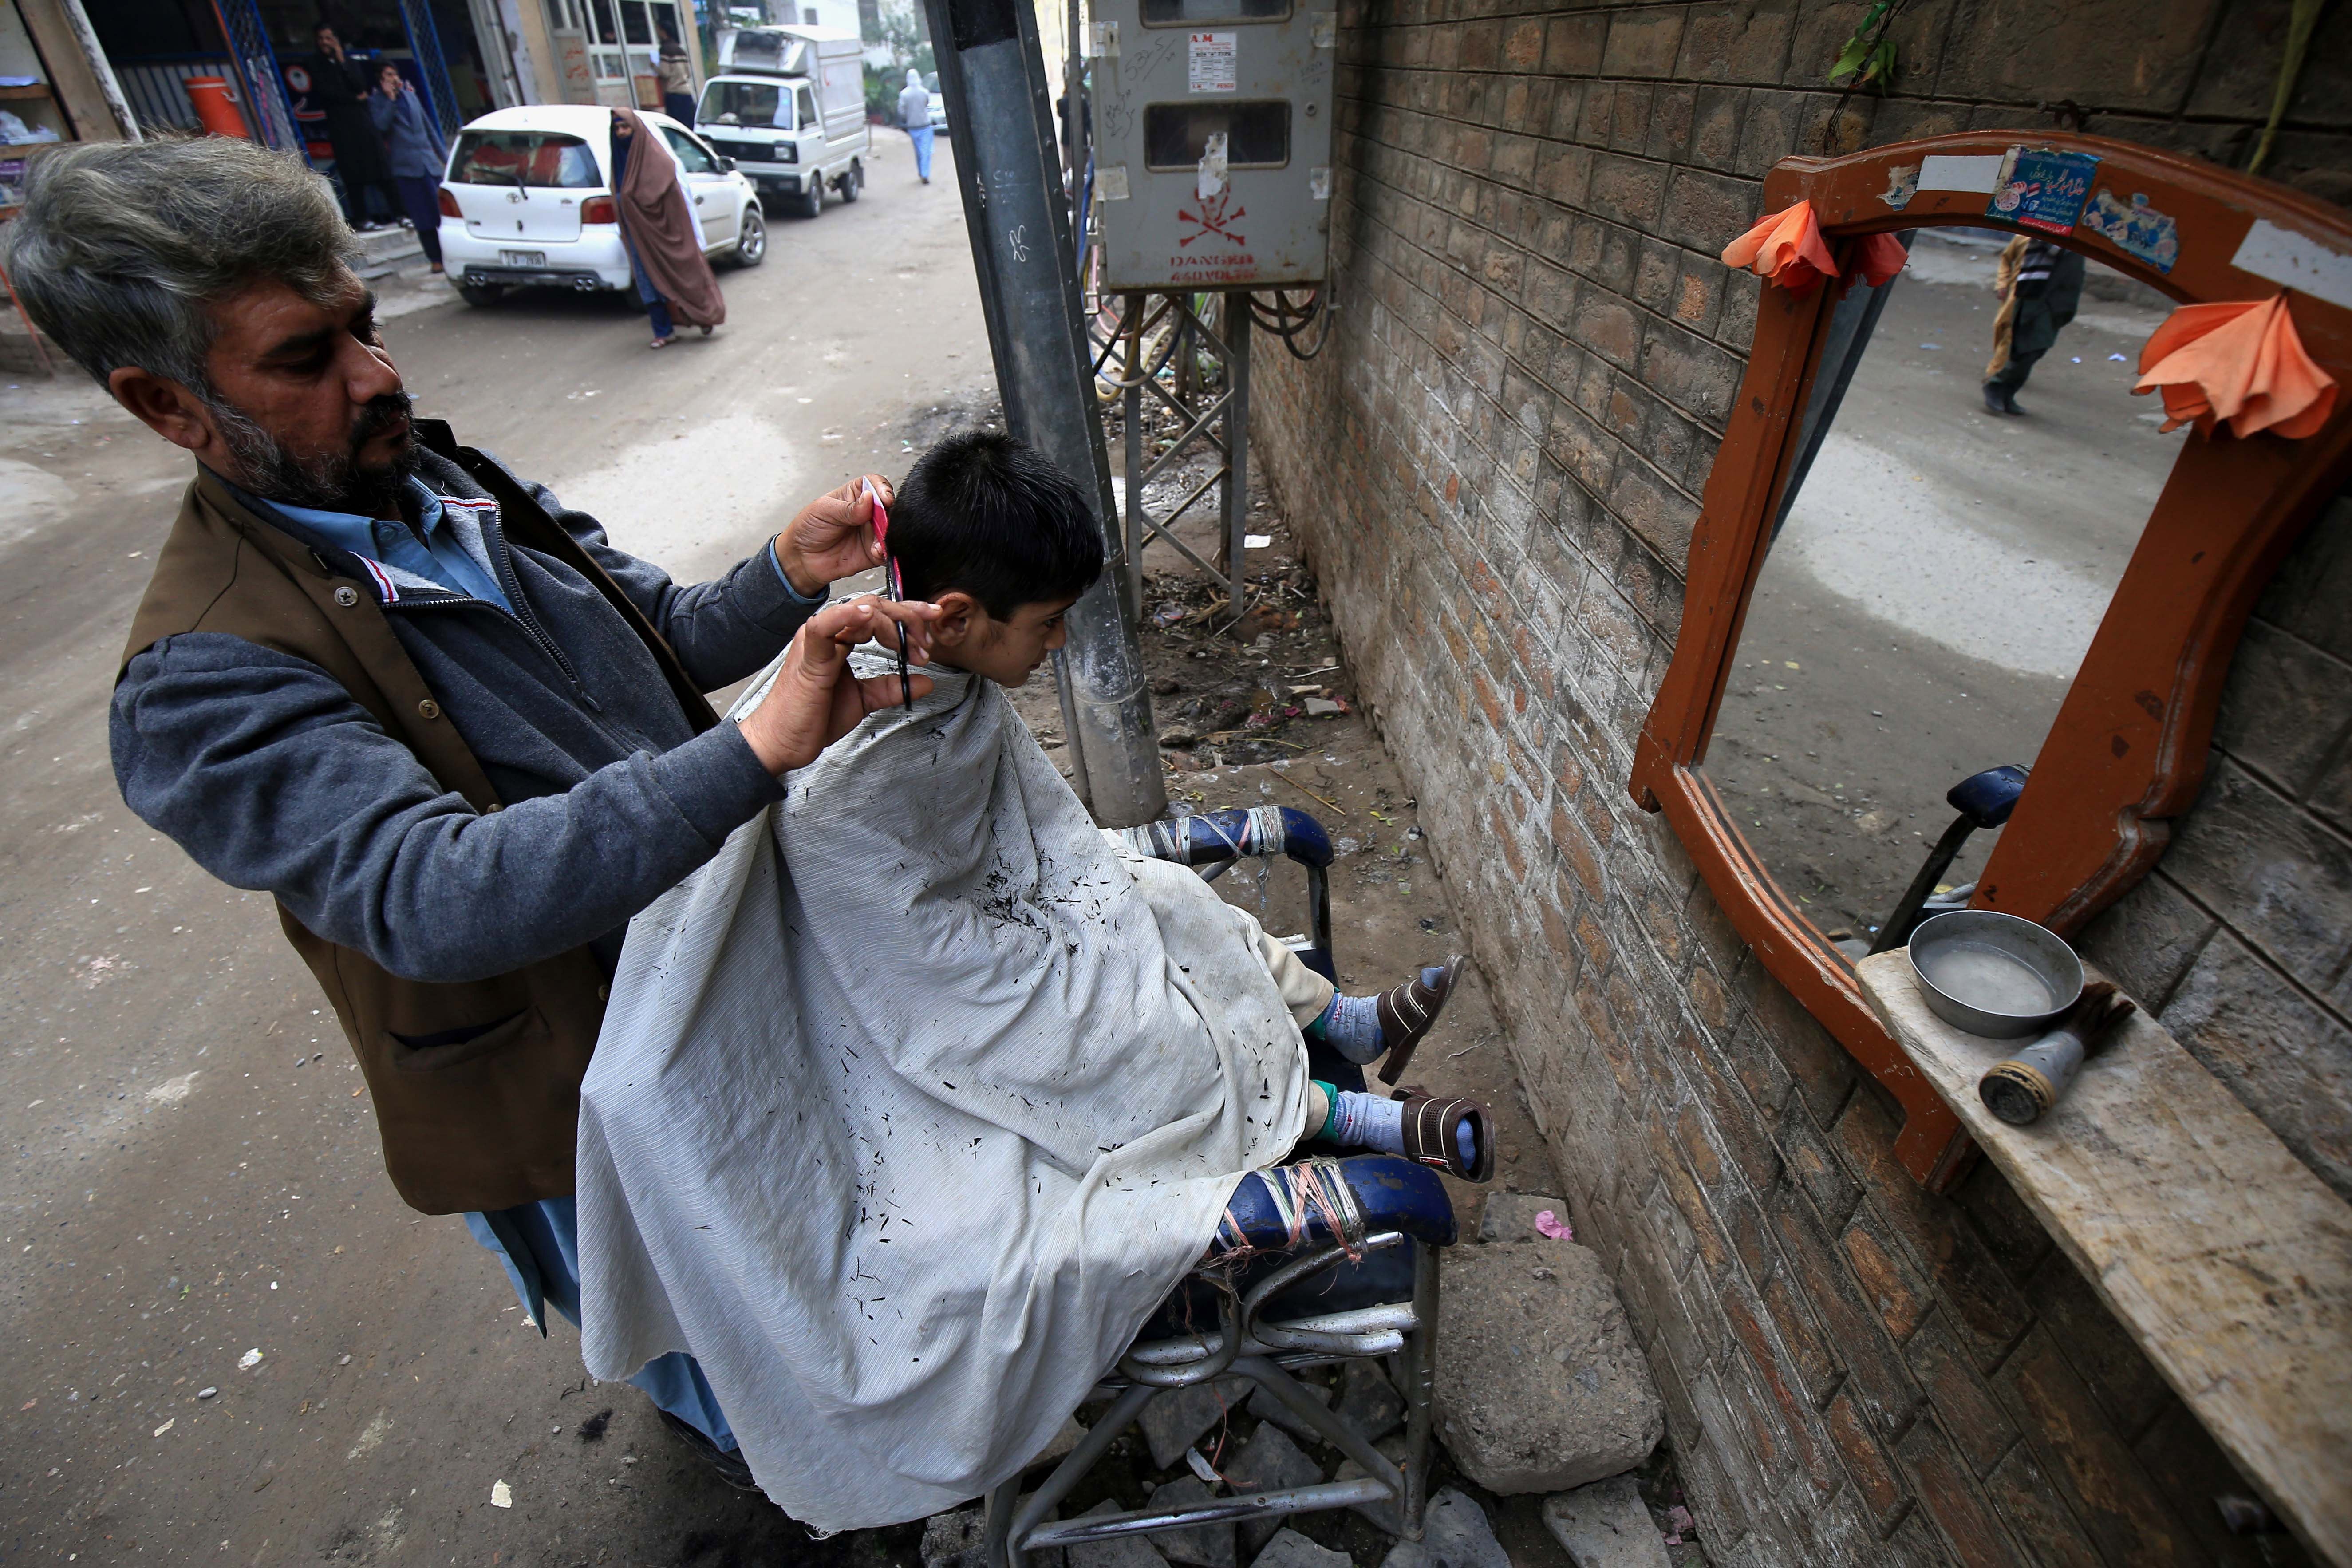 A barber gives a haircut to a customer at a roadside shop during World AIDS Day in Peshawar, Pakistan, 01 December 2020. According to doctors, cuts from razor blades that haven’t undergone proper sterilization are among some of the main causes of AIDS spread. World AIDS Day, observed annually on 01 December, is dedicated to raising awareness against the spread of AIDS and HIV infections. (EPA/ARSHAD ARBAB)